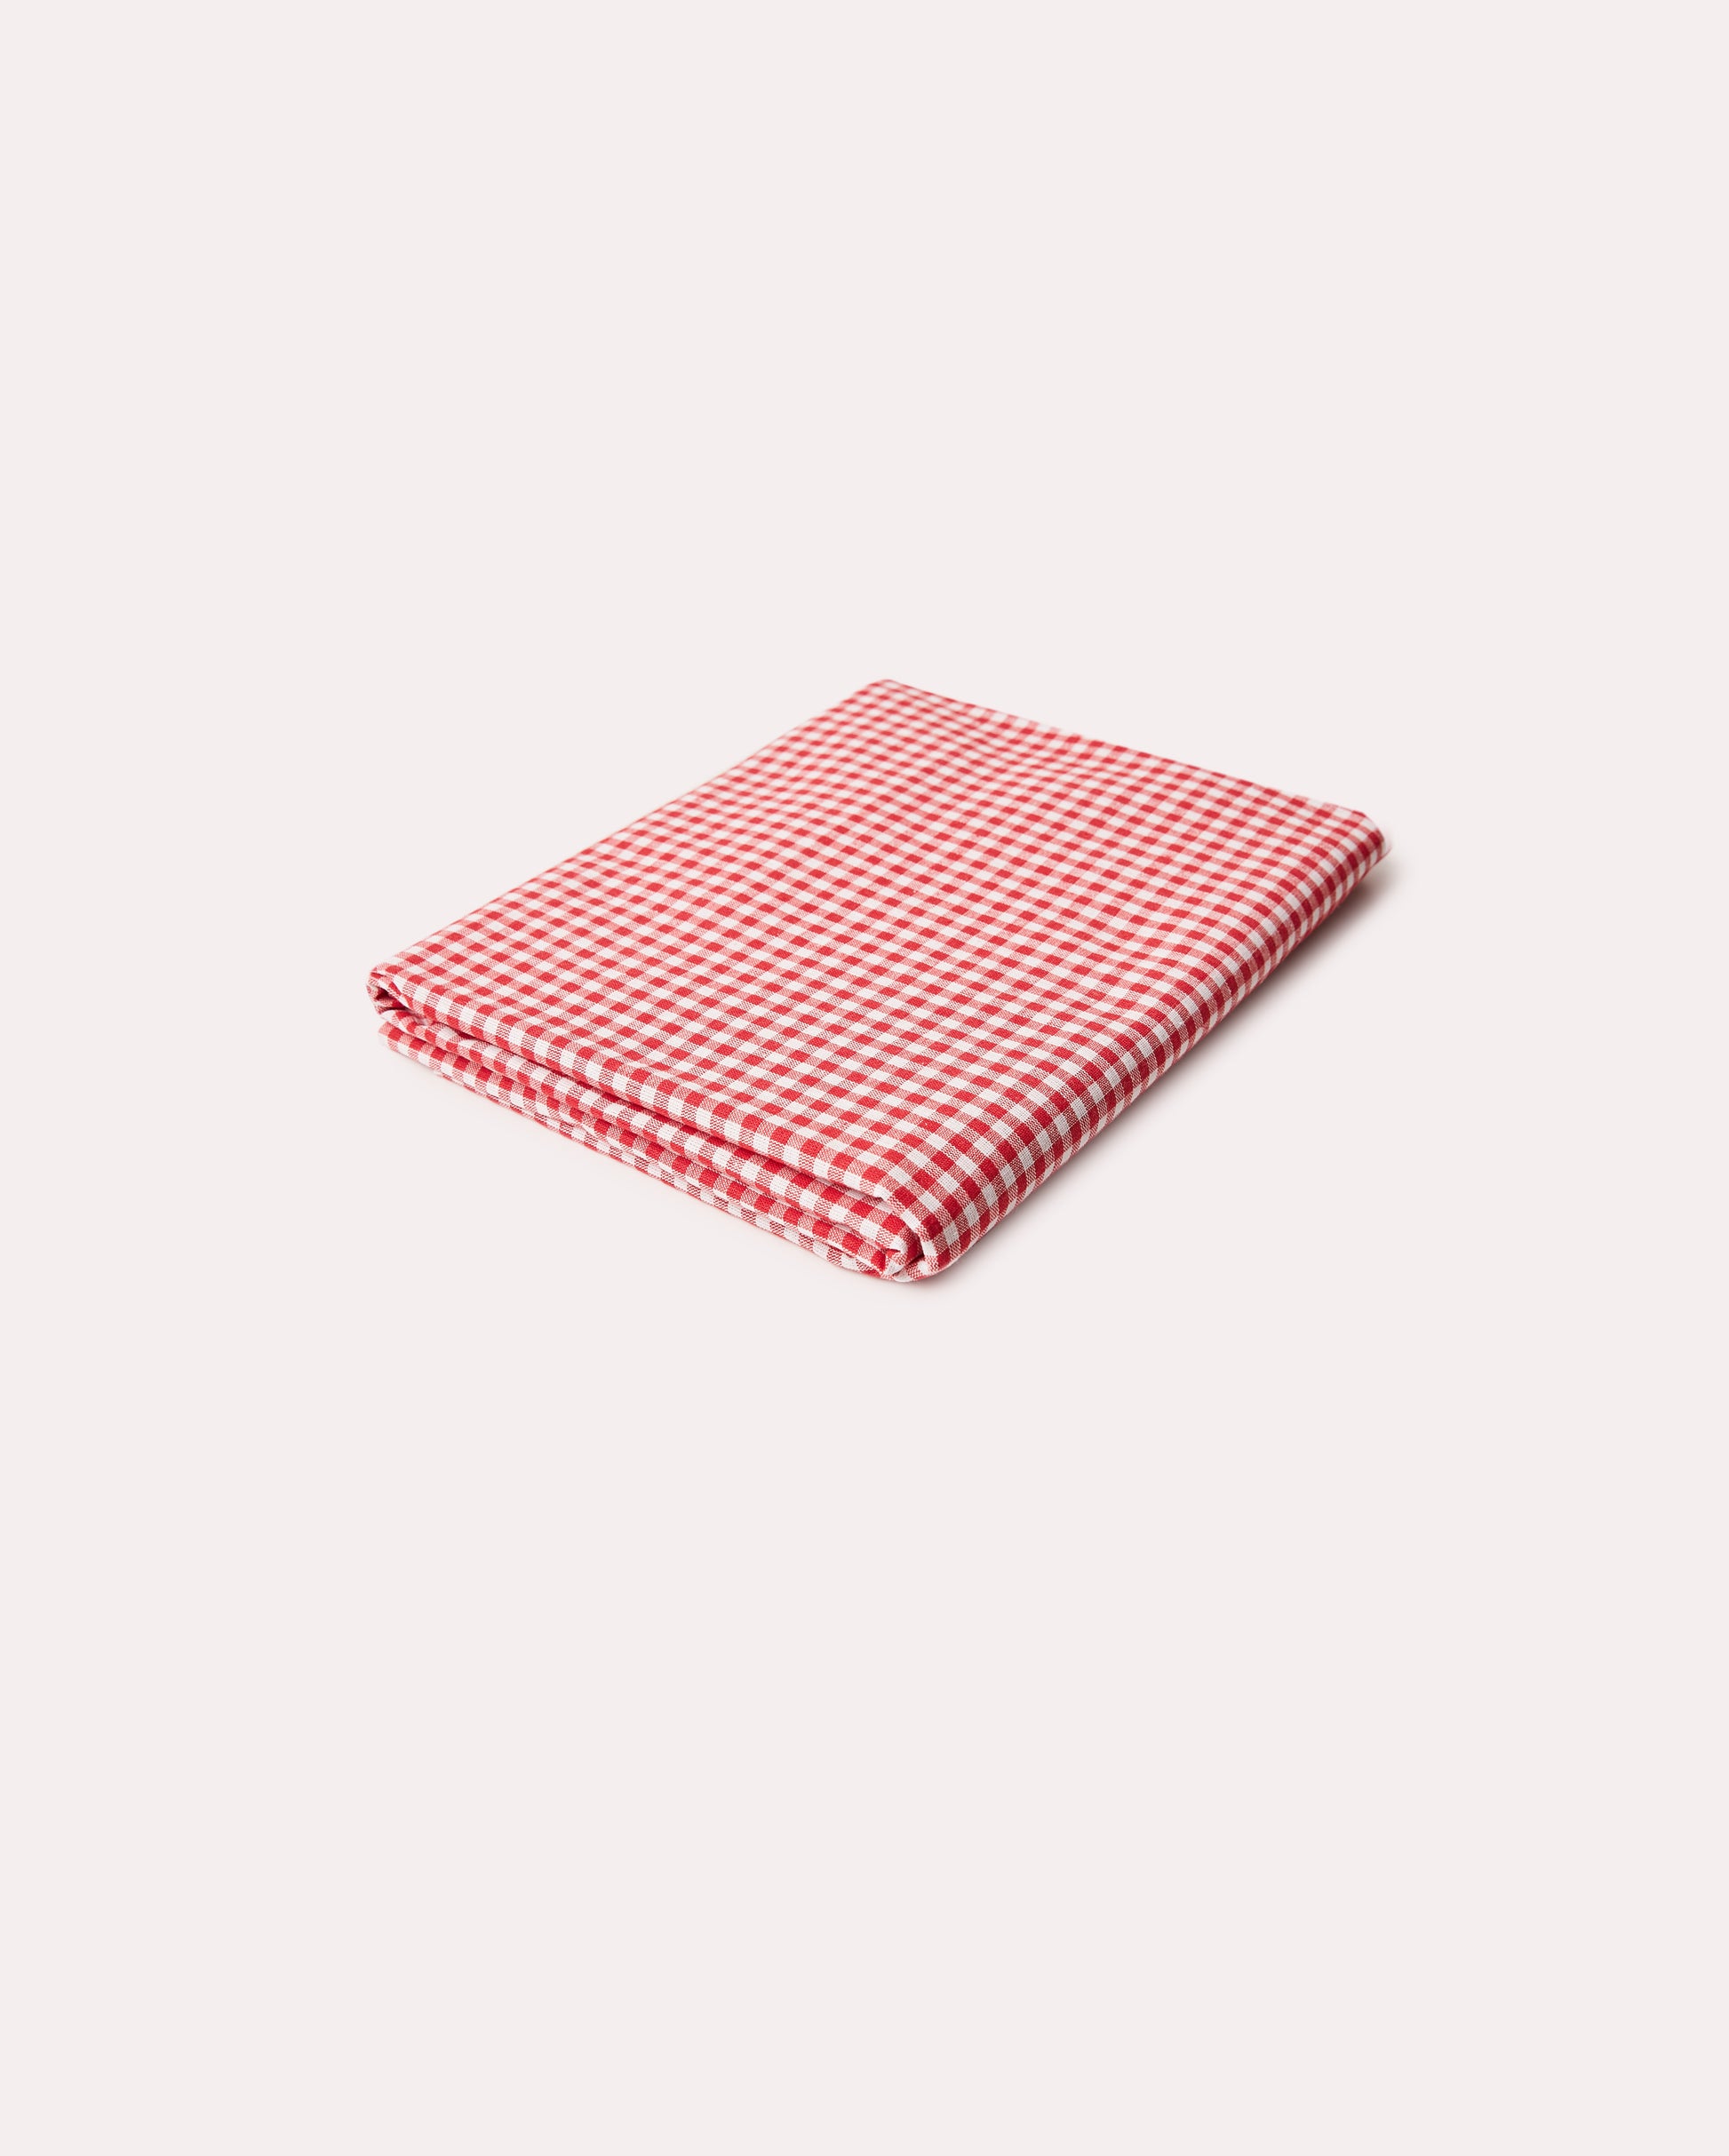 Checked Cotton Table Cloth - Red - Ocoza